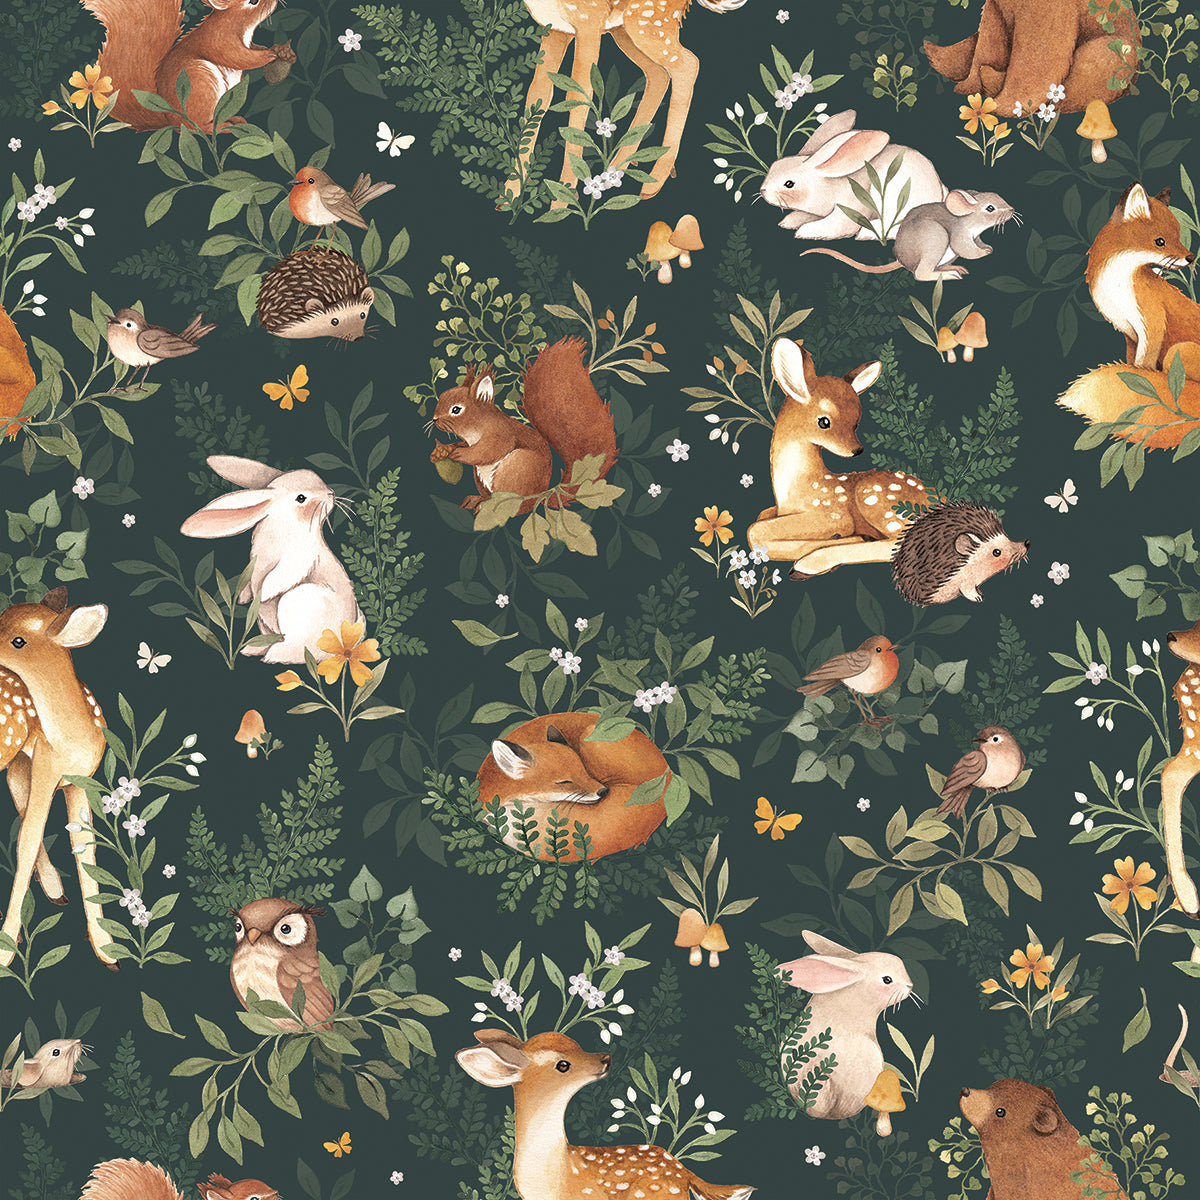 Buy BACKWOODS Forest Animals Wallpaper  Tree  Rabbits  Online in India   Etsy